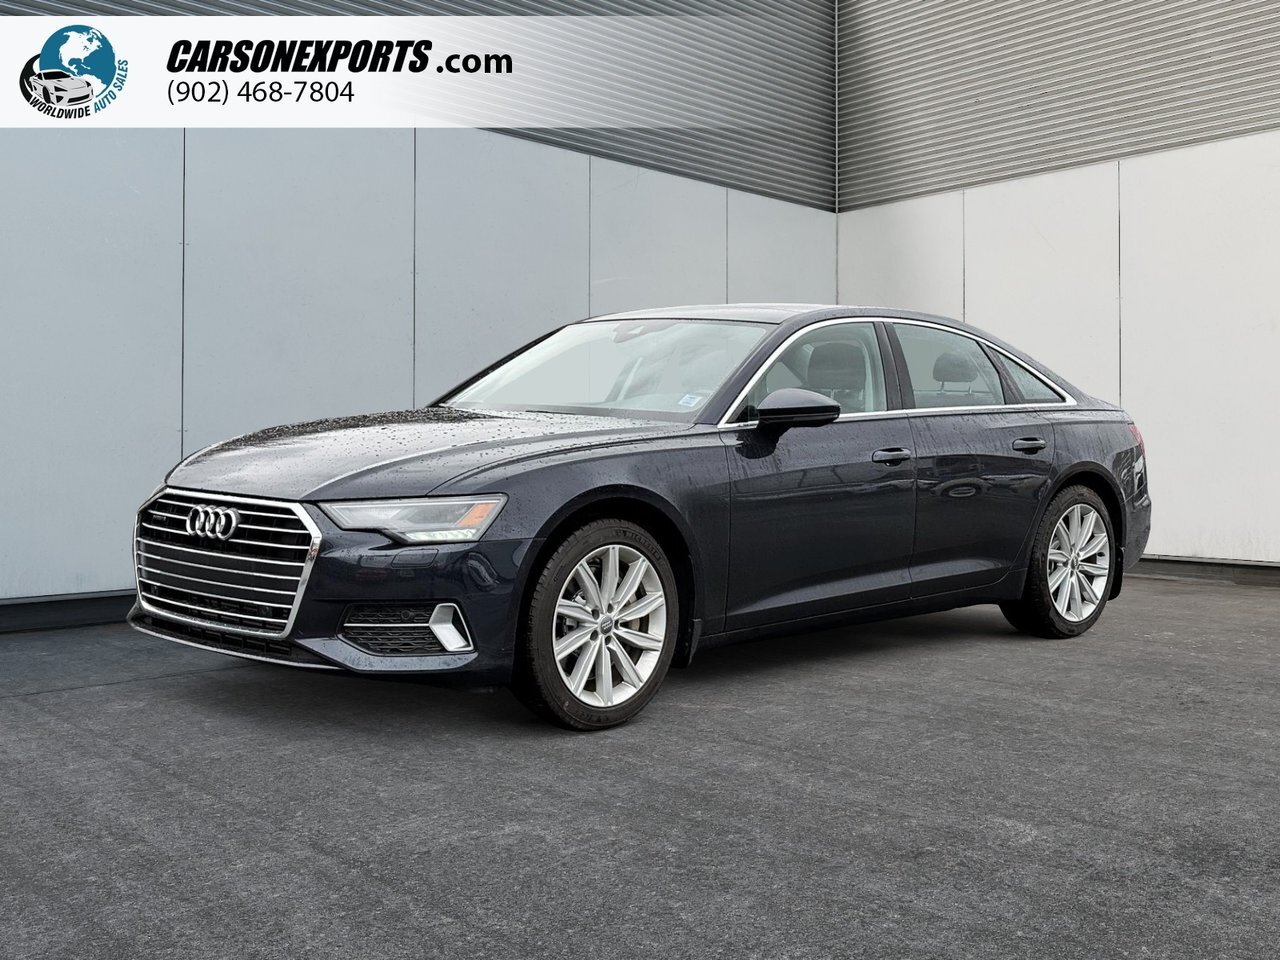 2019 Audi A6 Progressiv The best place to buy a used car. Perio